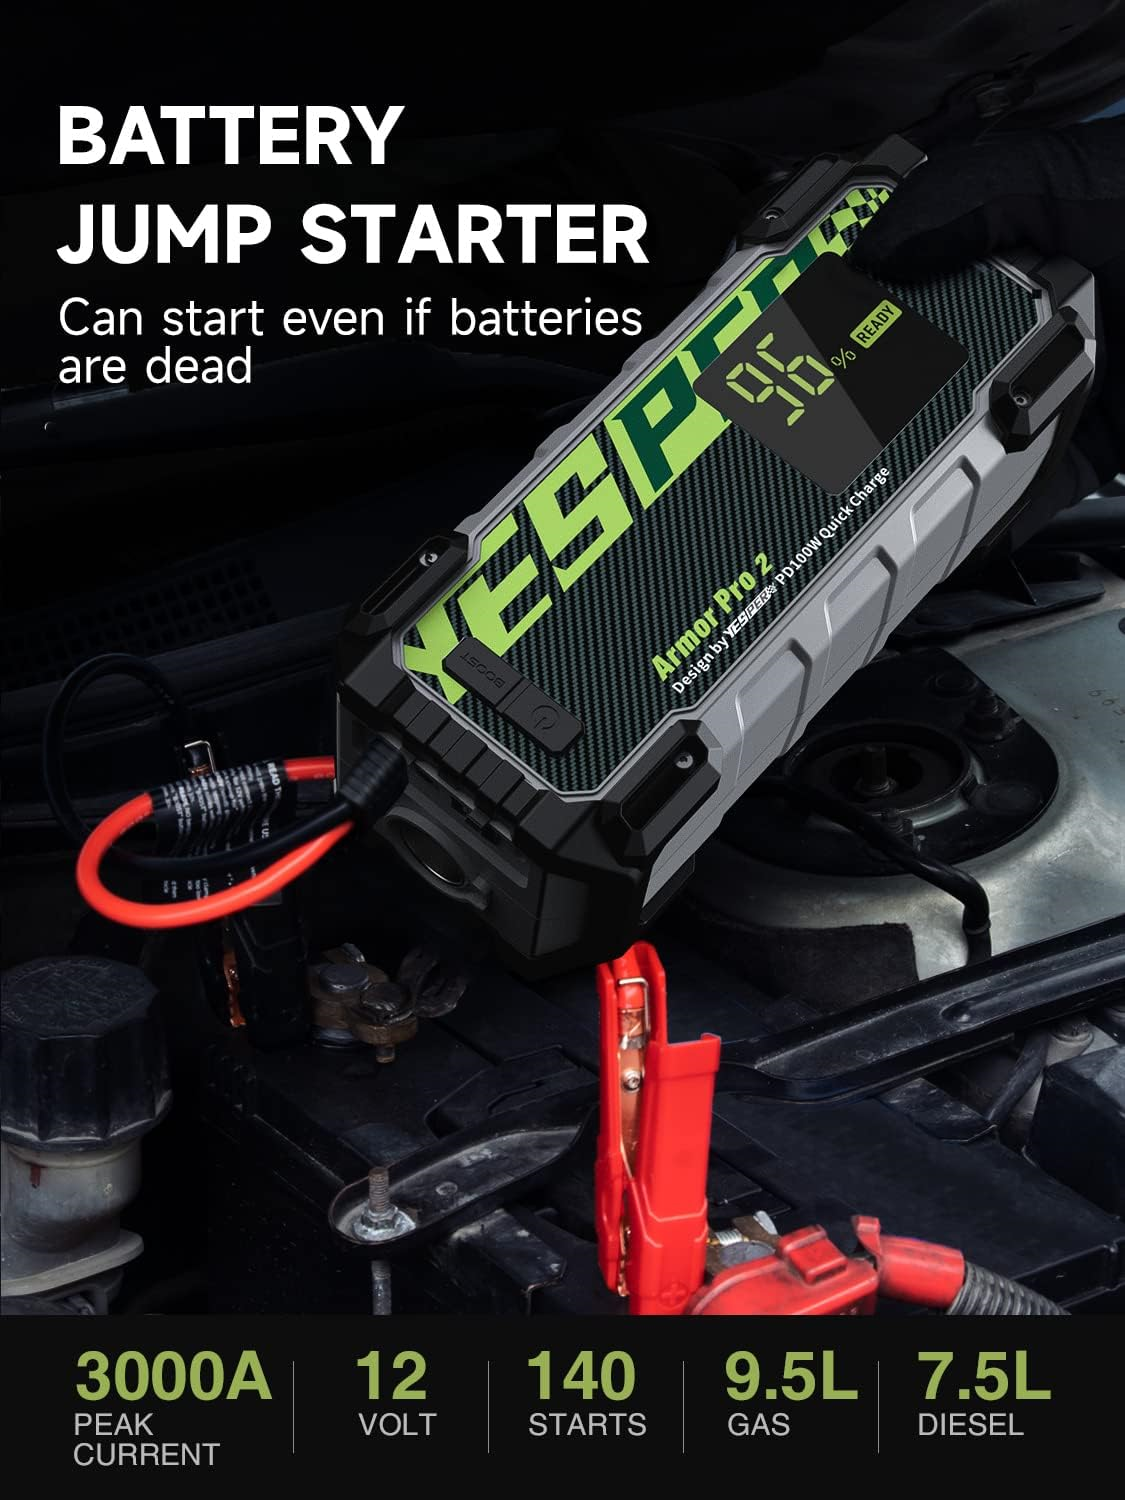 Yesper, Yesper ARMOR-PRO-2 Jump Starter Battery Pack 3000A 83200mAh 140 Starts for 12V Vehicles Up To 9.5L Gas and 7.5L Diesel Engines New